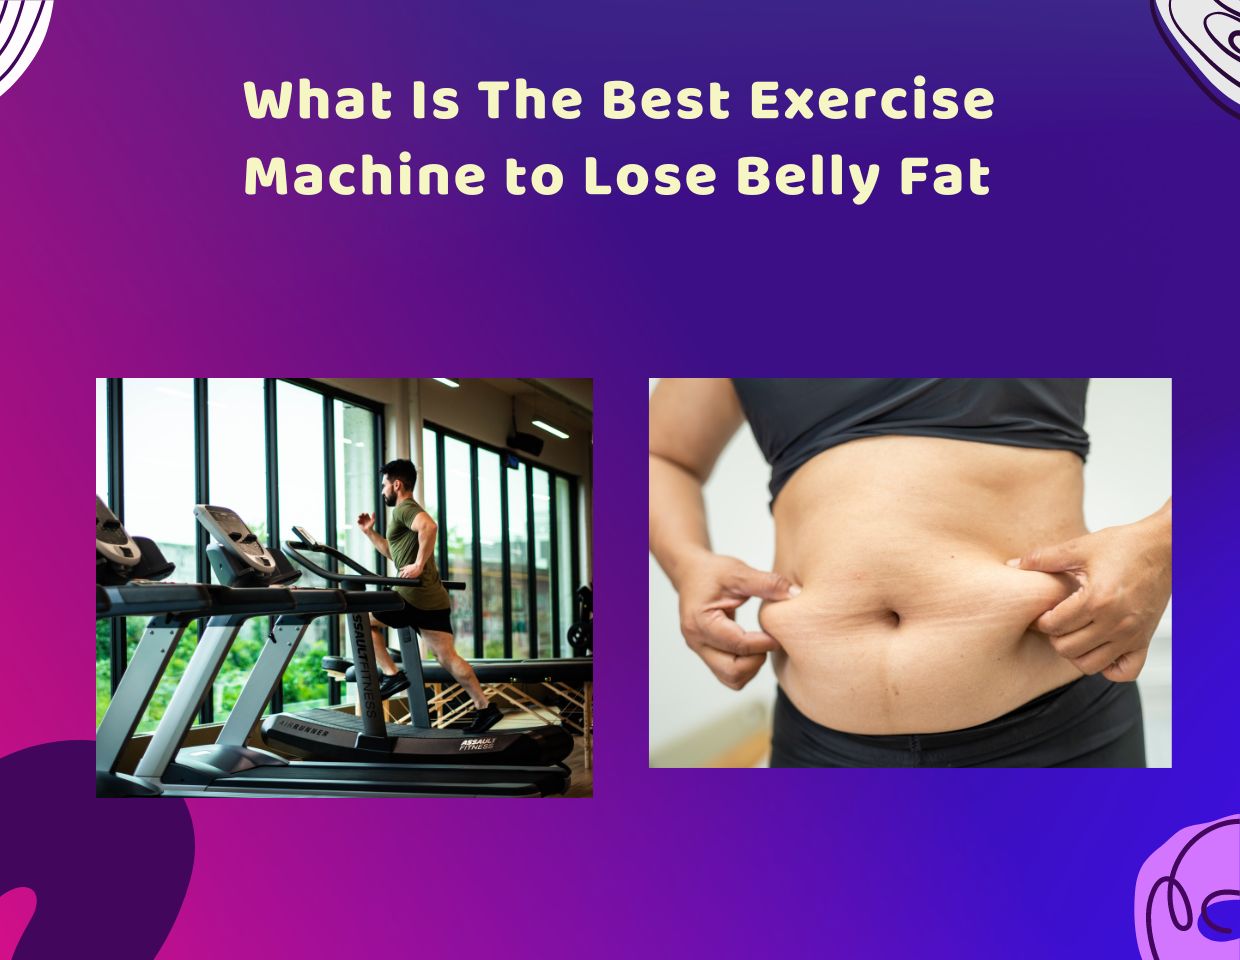 exercise-machine-lose-belly-fat